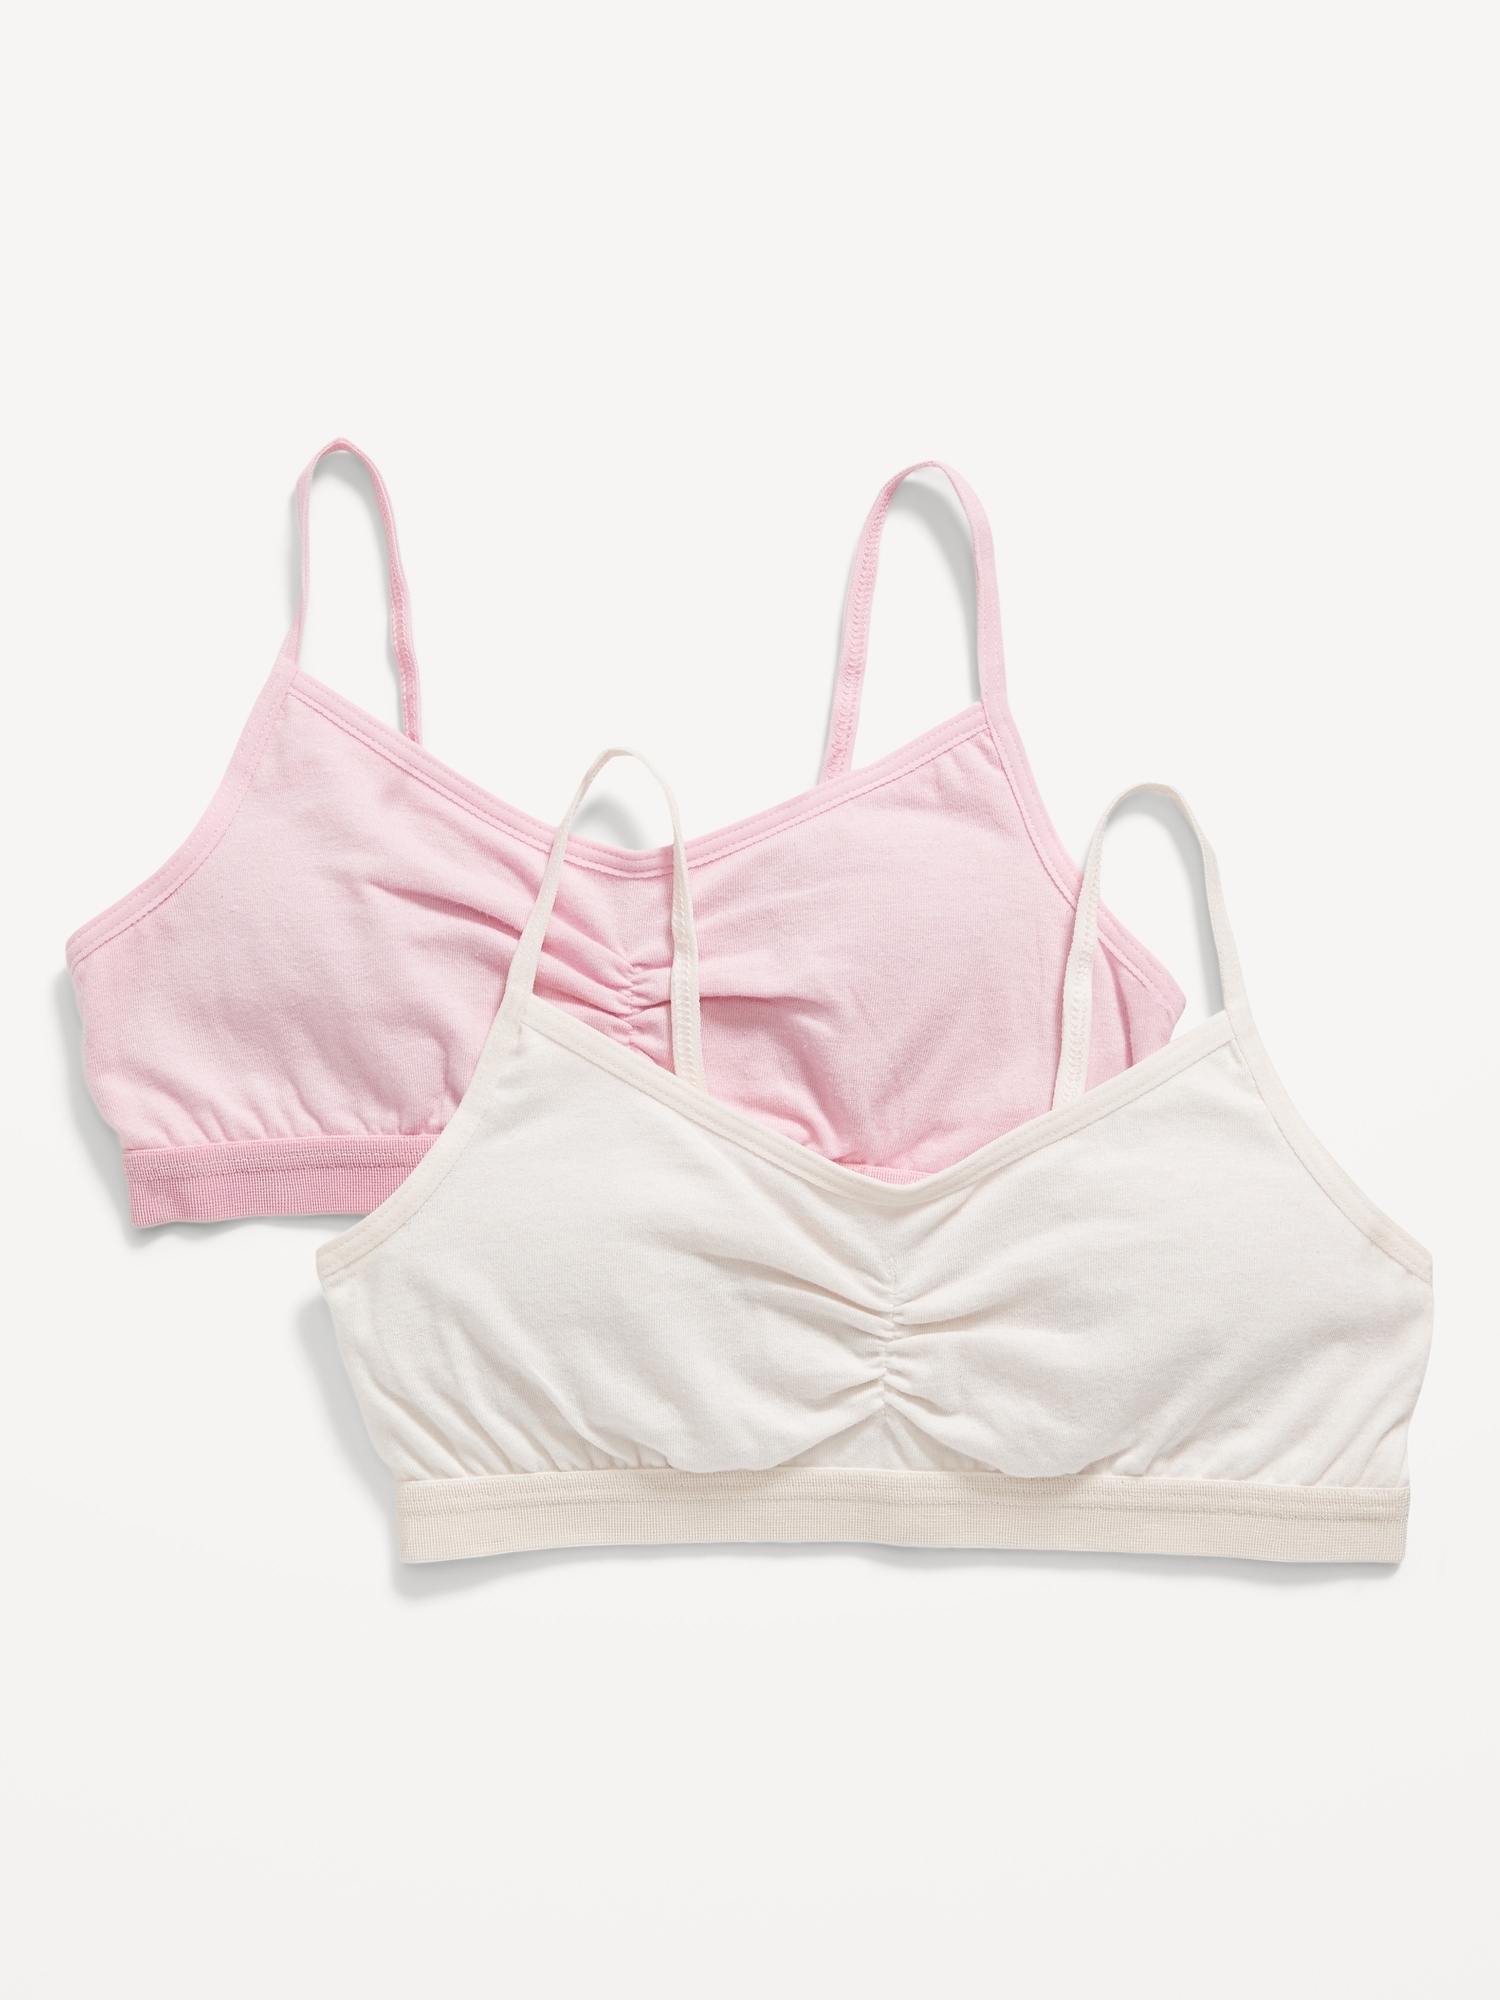 George Girls' Cami 2-Pack, Sizes 6-12 